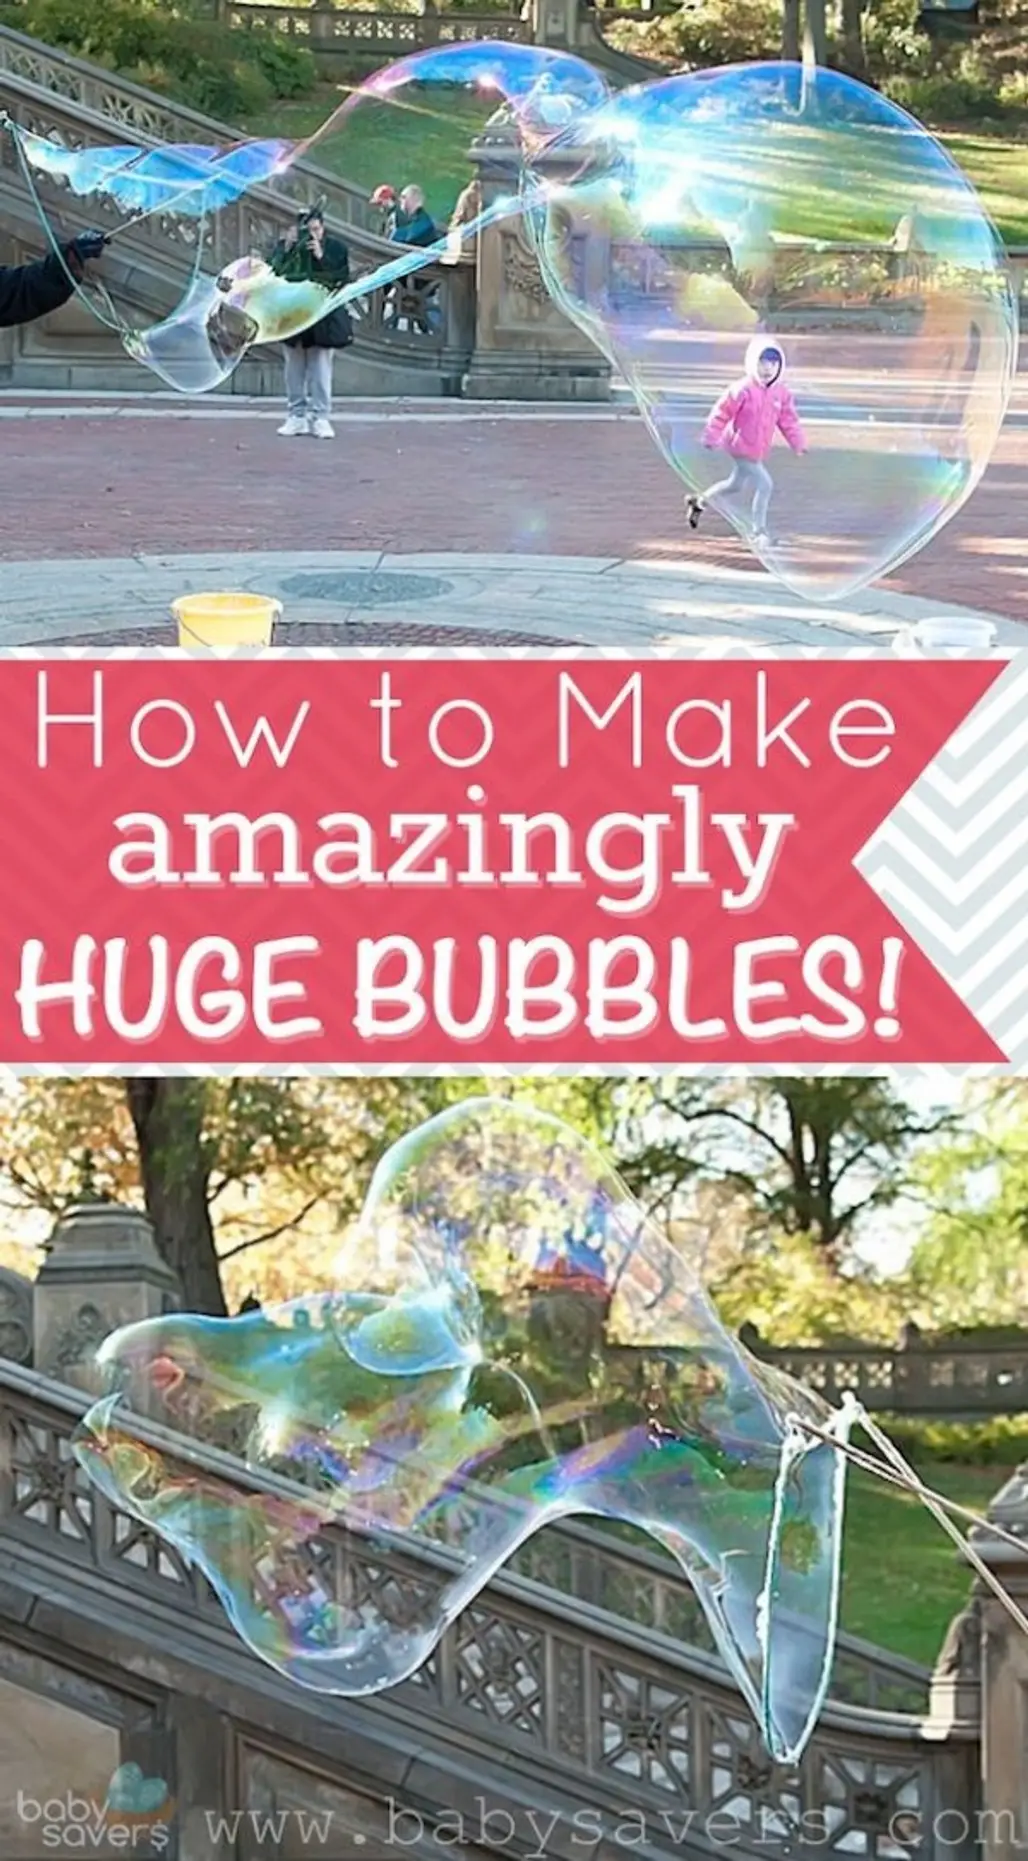 How to Make Amazingly Huge Bubbles